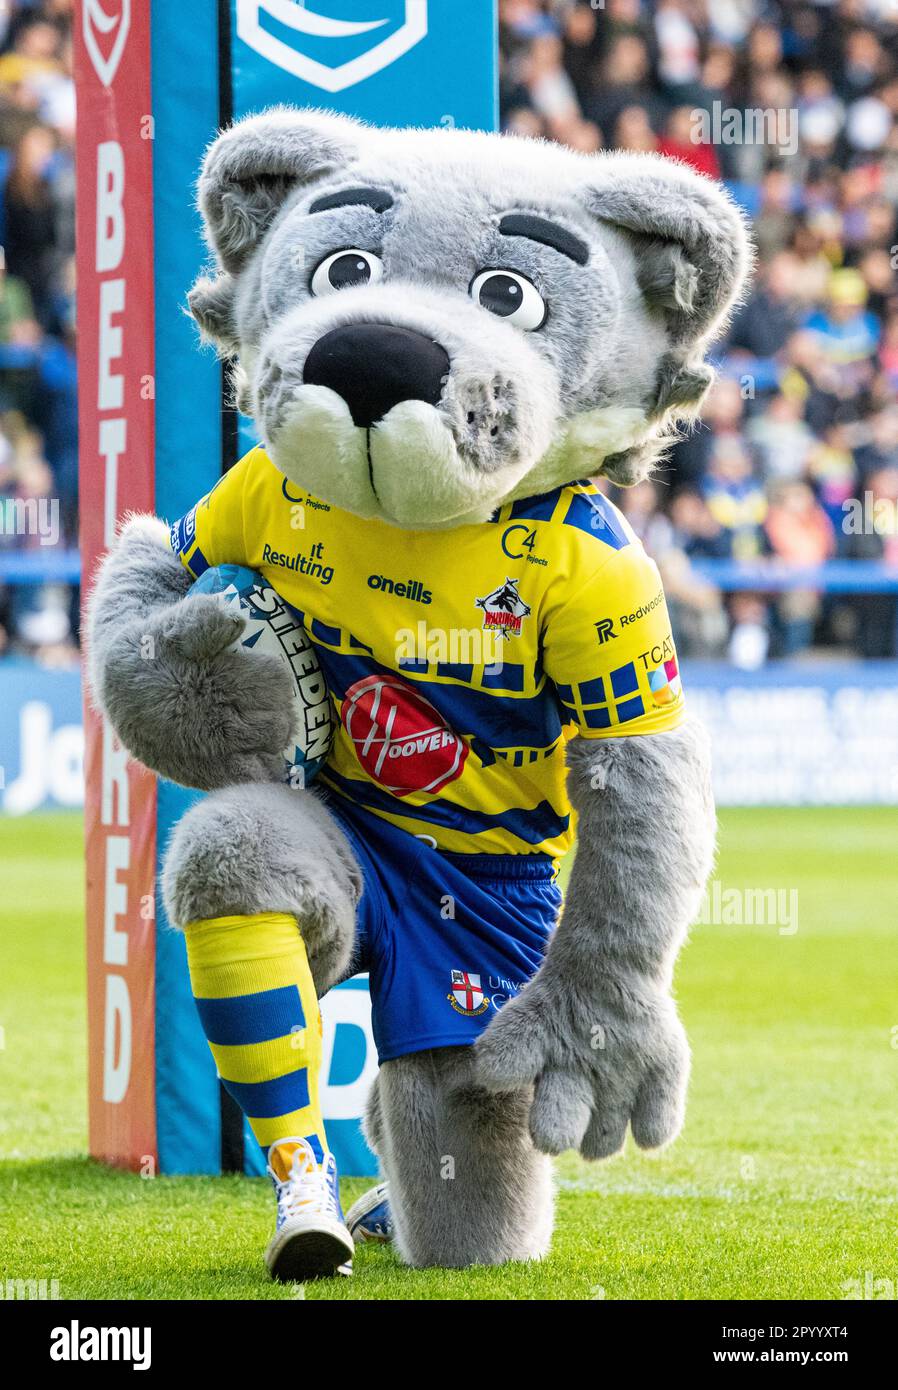 Warrington, Cheshire, England 5th May 2023. Warringtonmascot ' Wolfie’ entertains the crowd ahead of kick off, during Warrington Wolves Rugby League Football Club V Wakefield Trinity Rugby League Football Club at the Halliwell Jones Stadium, the Betfred Super League. (Credit Image: ©Cody Froggatt/Alamy live news) Stock Photo